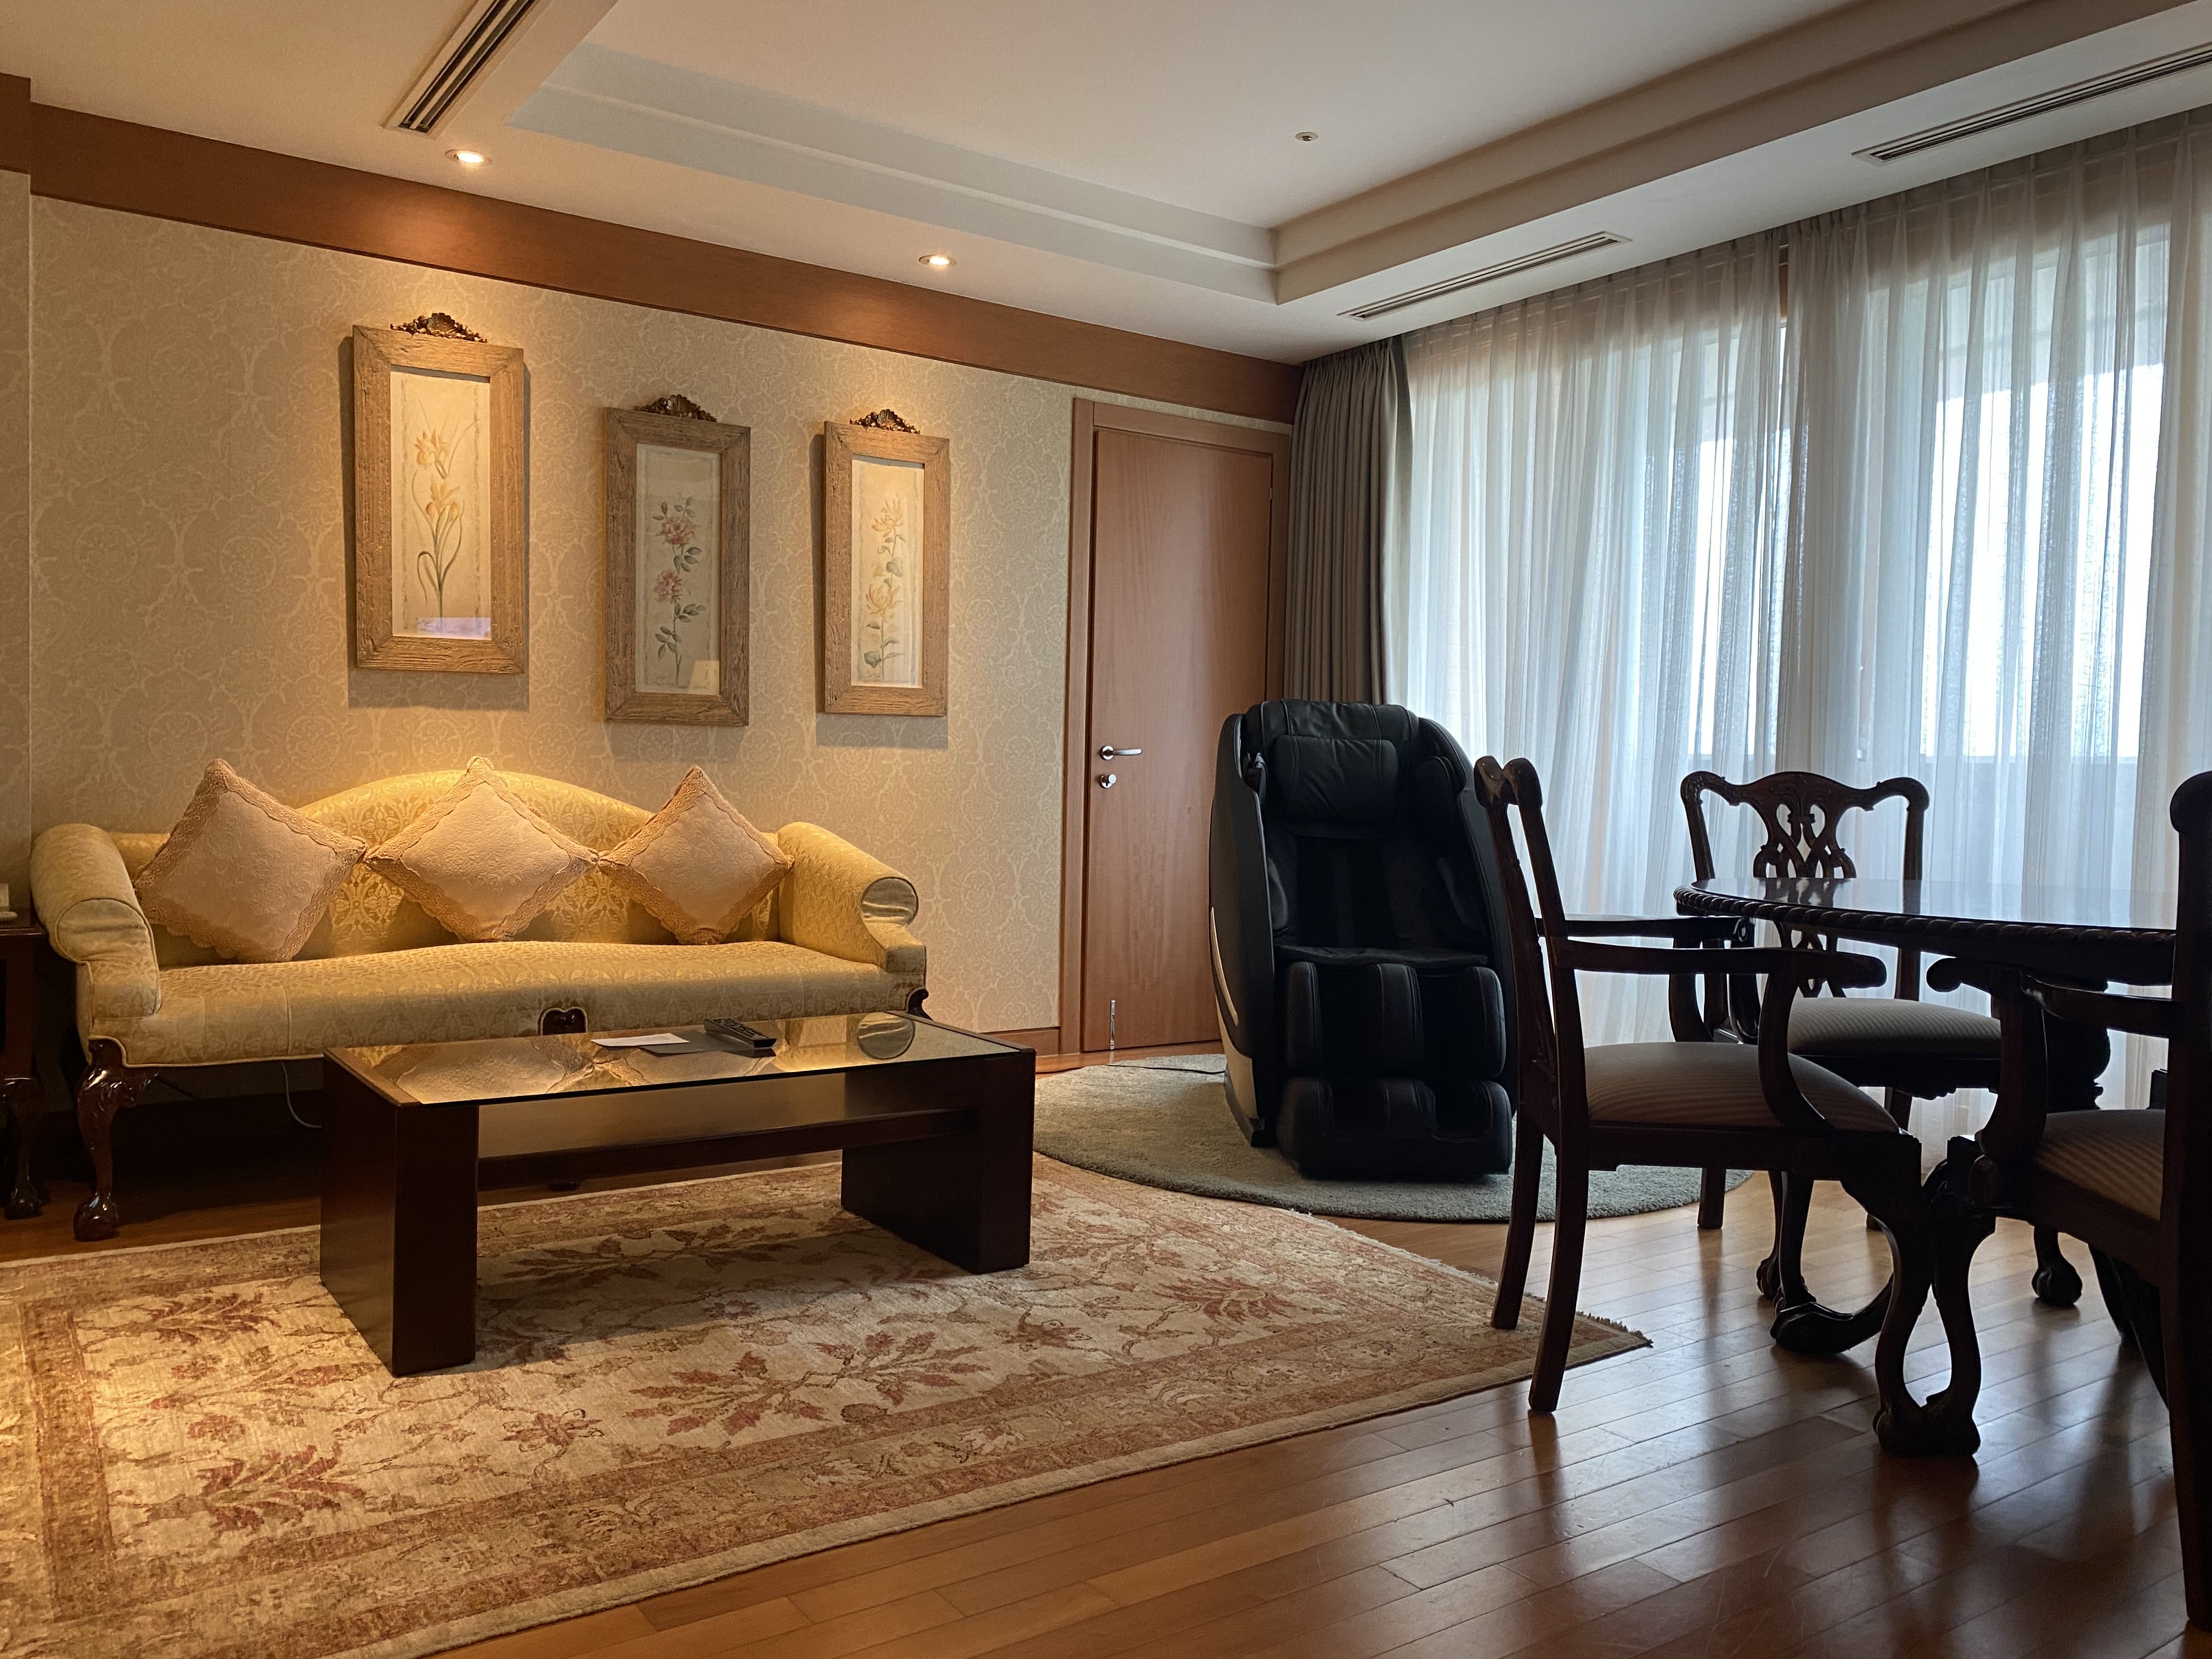 James II Suite guest room0 : A room with an antique sofa and table